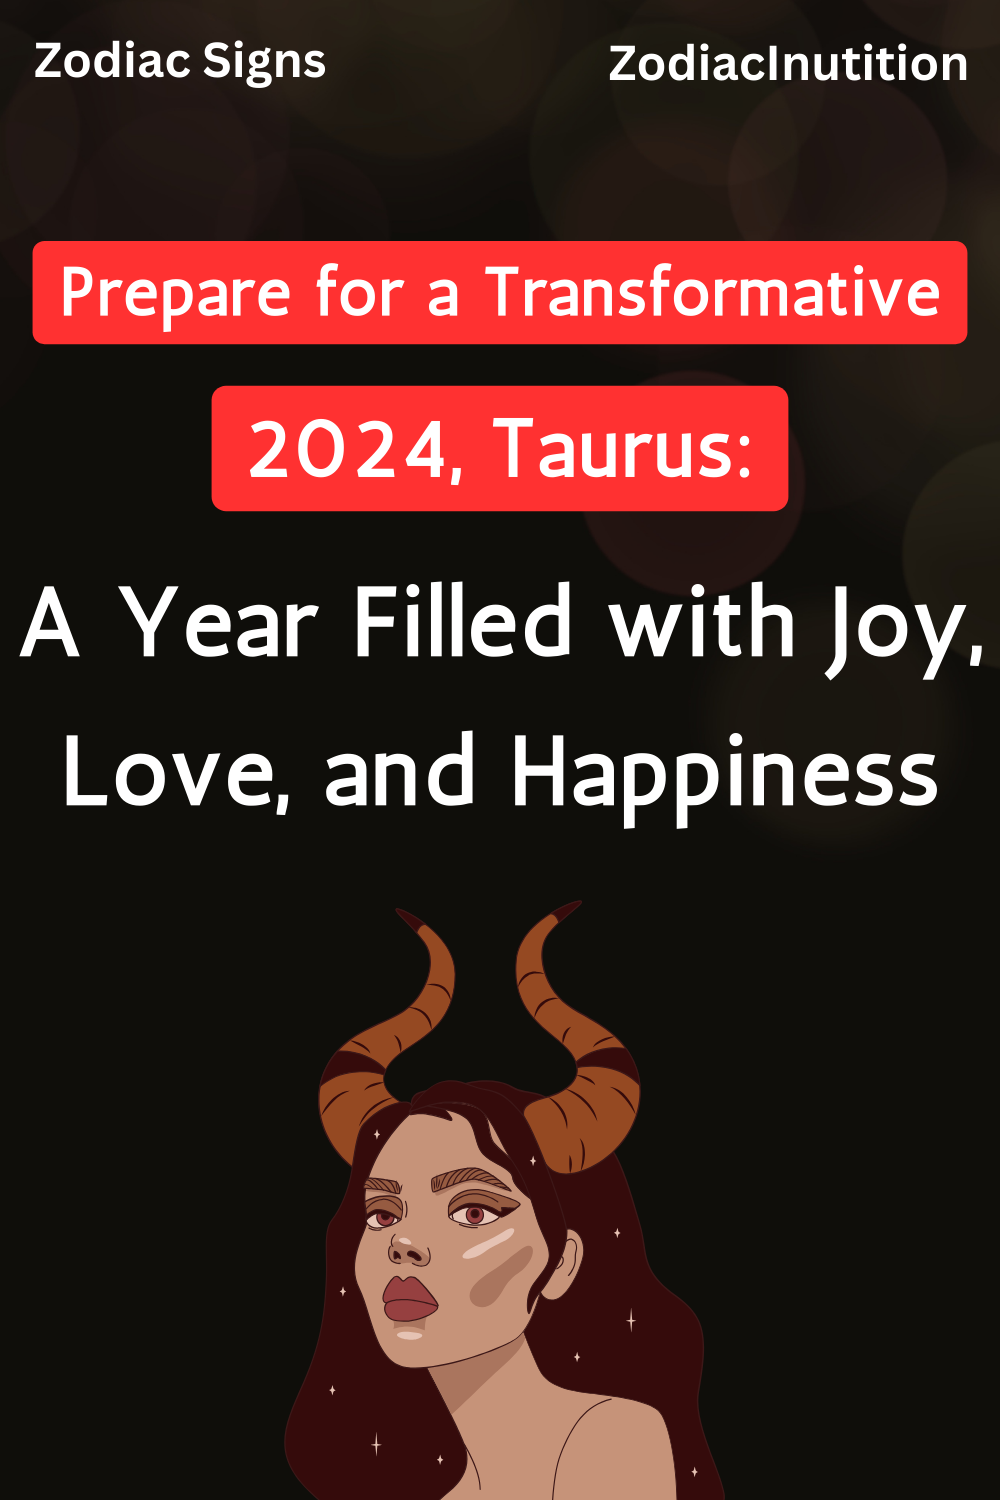 Prepare for a Transformative 2024, Taurus: A Year Filled with Joy, Love, and Happiness